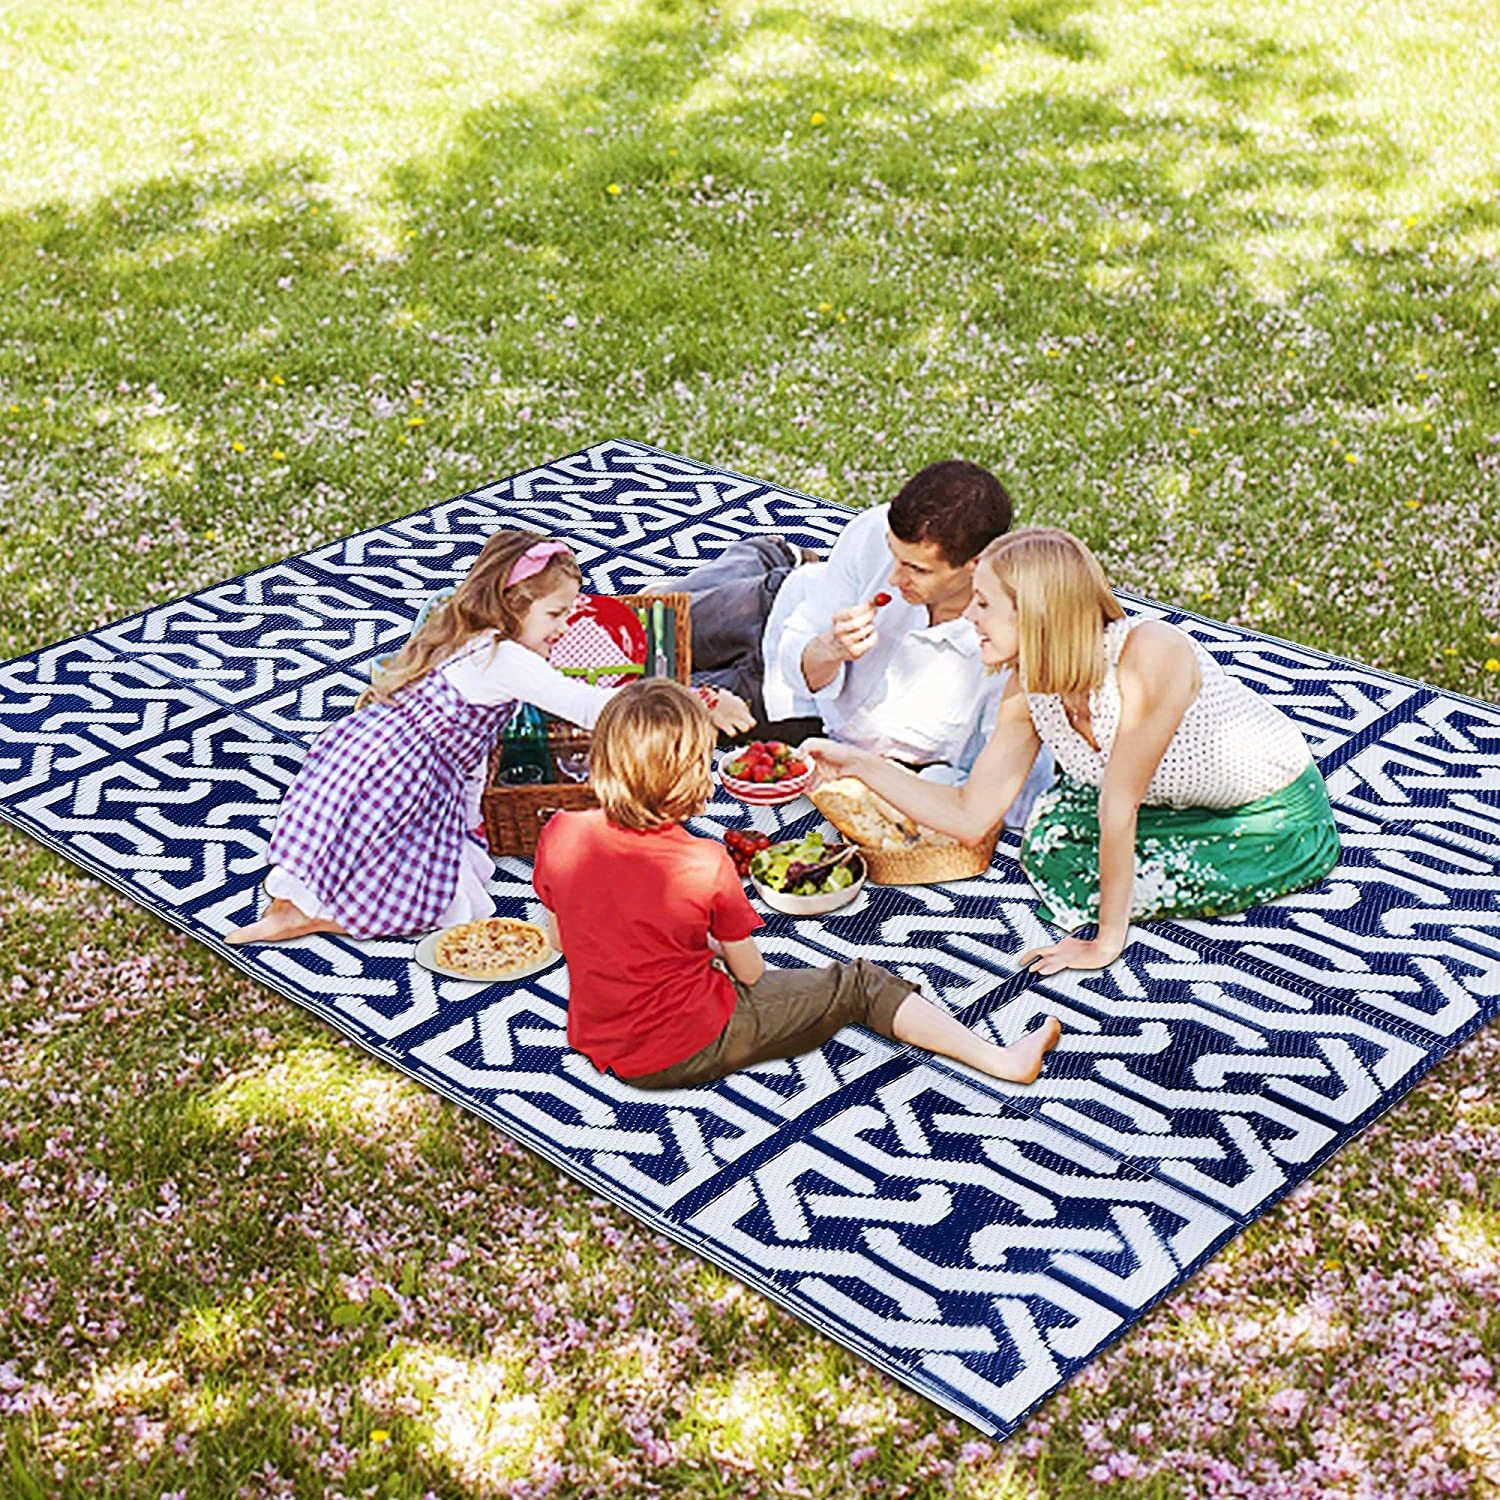 Reversible Mats Plastic Outdoor Rug for Camping, Patio, Backyard, RV,  Picnic, Deck - On Sale - Bed Bath & Beyond - 31265248